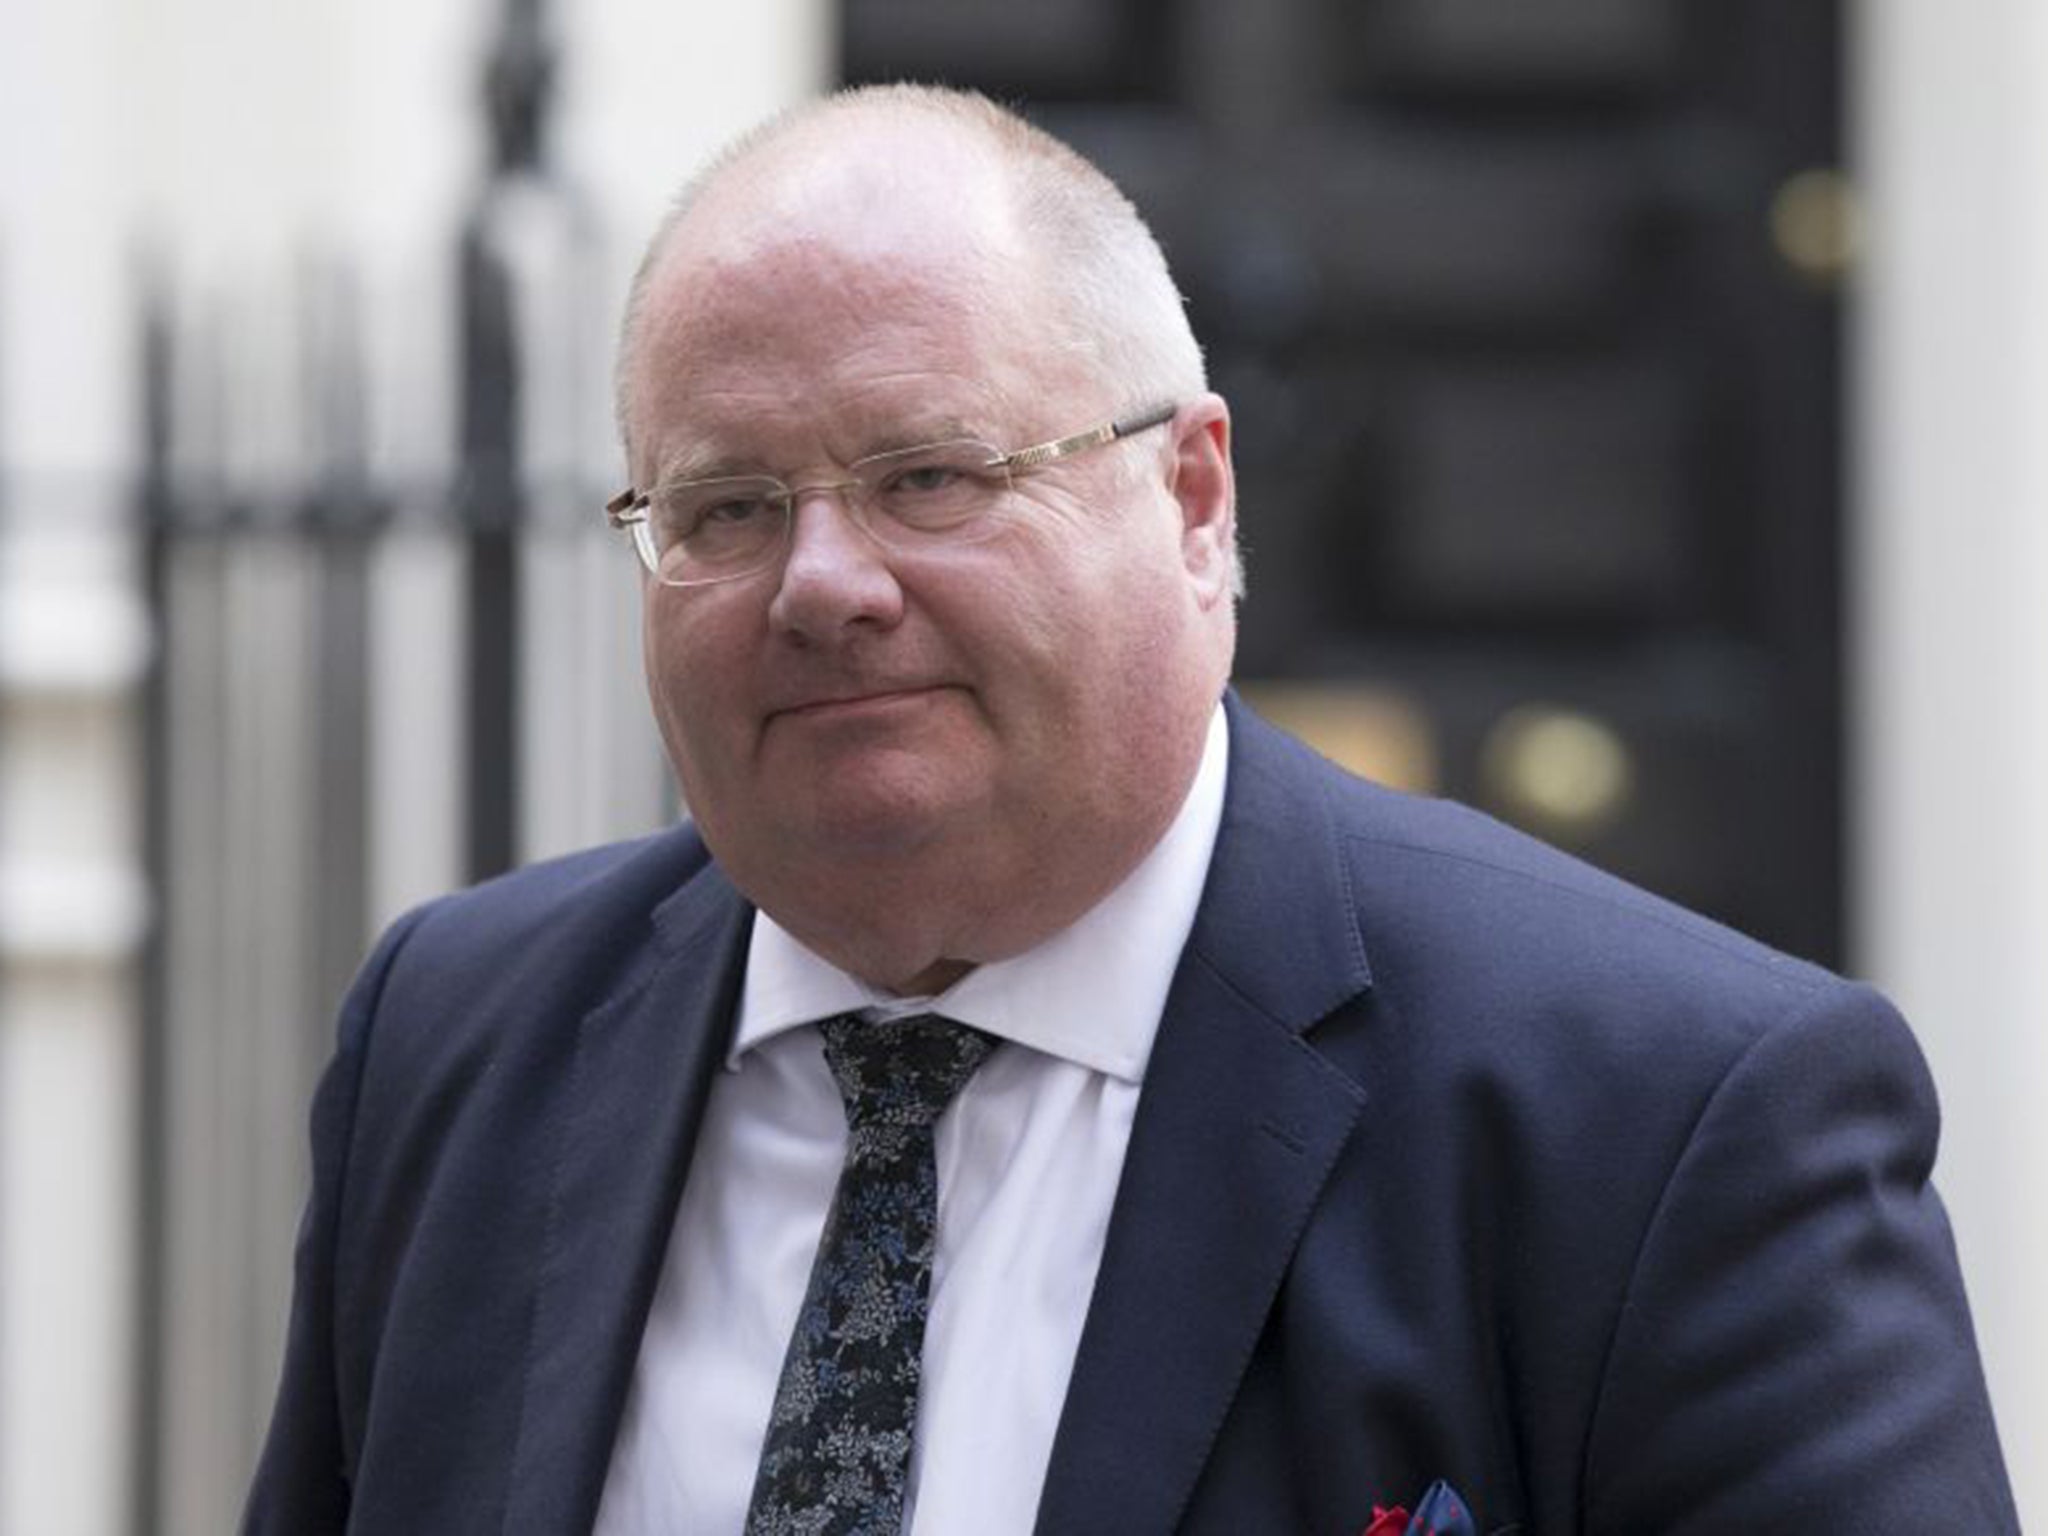 The cabinet office will adopt several of the recommendations made in Sir Eric Pickles' report on electoral fraud